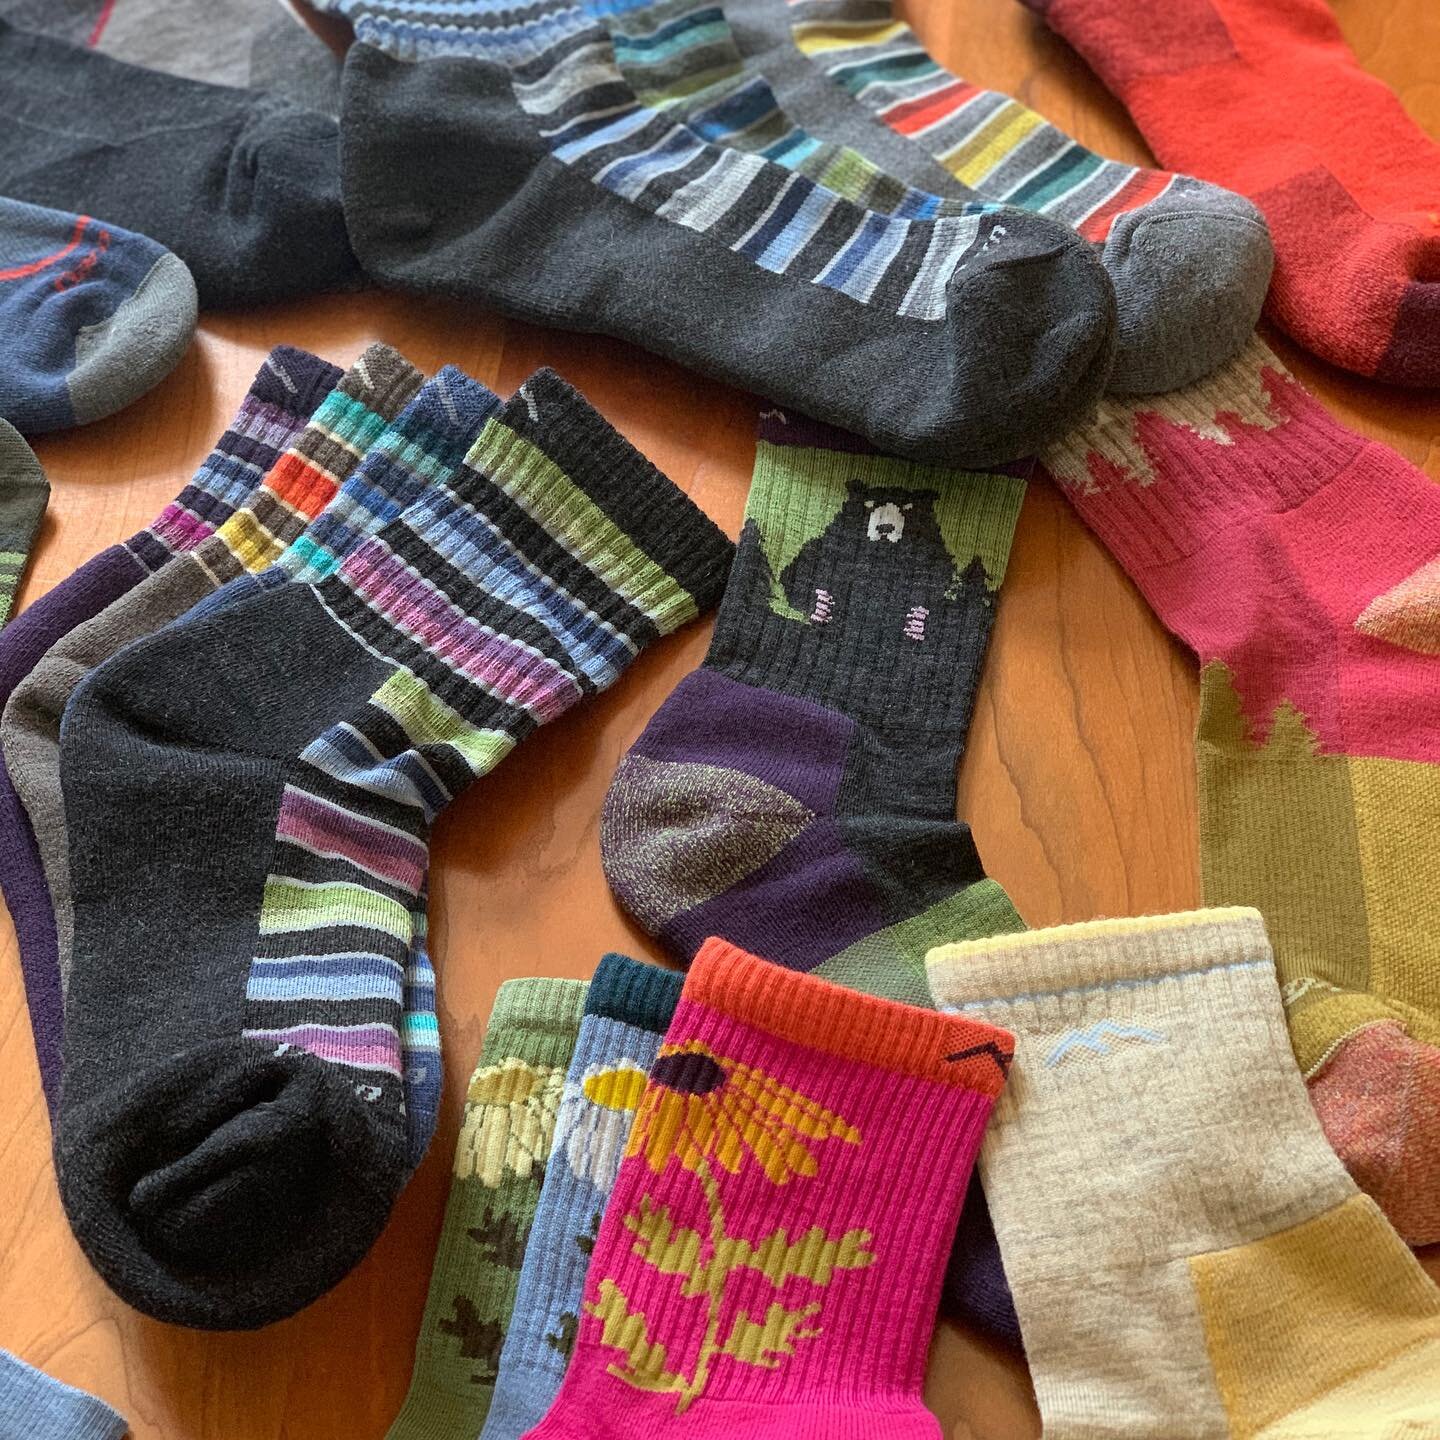 New sock day! One of our favorite days of the year 🎉 🐻 🌻 🧦 #darntough #darntoughvermont #darntoughsocks